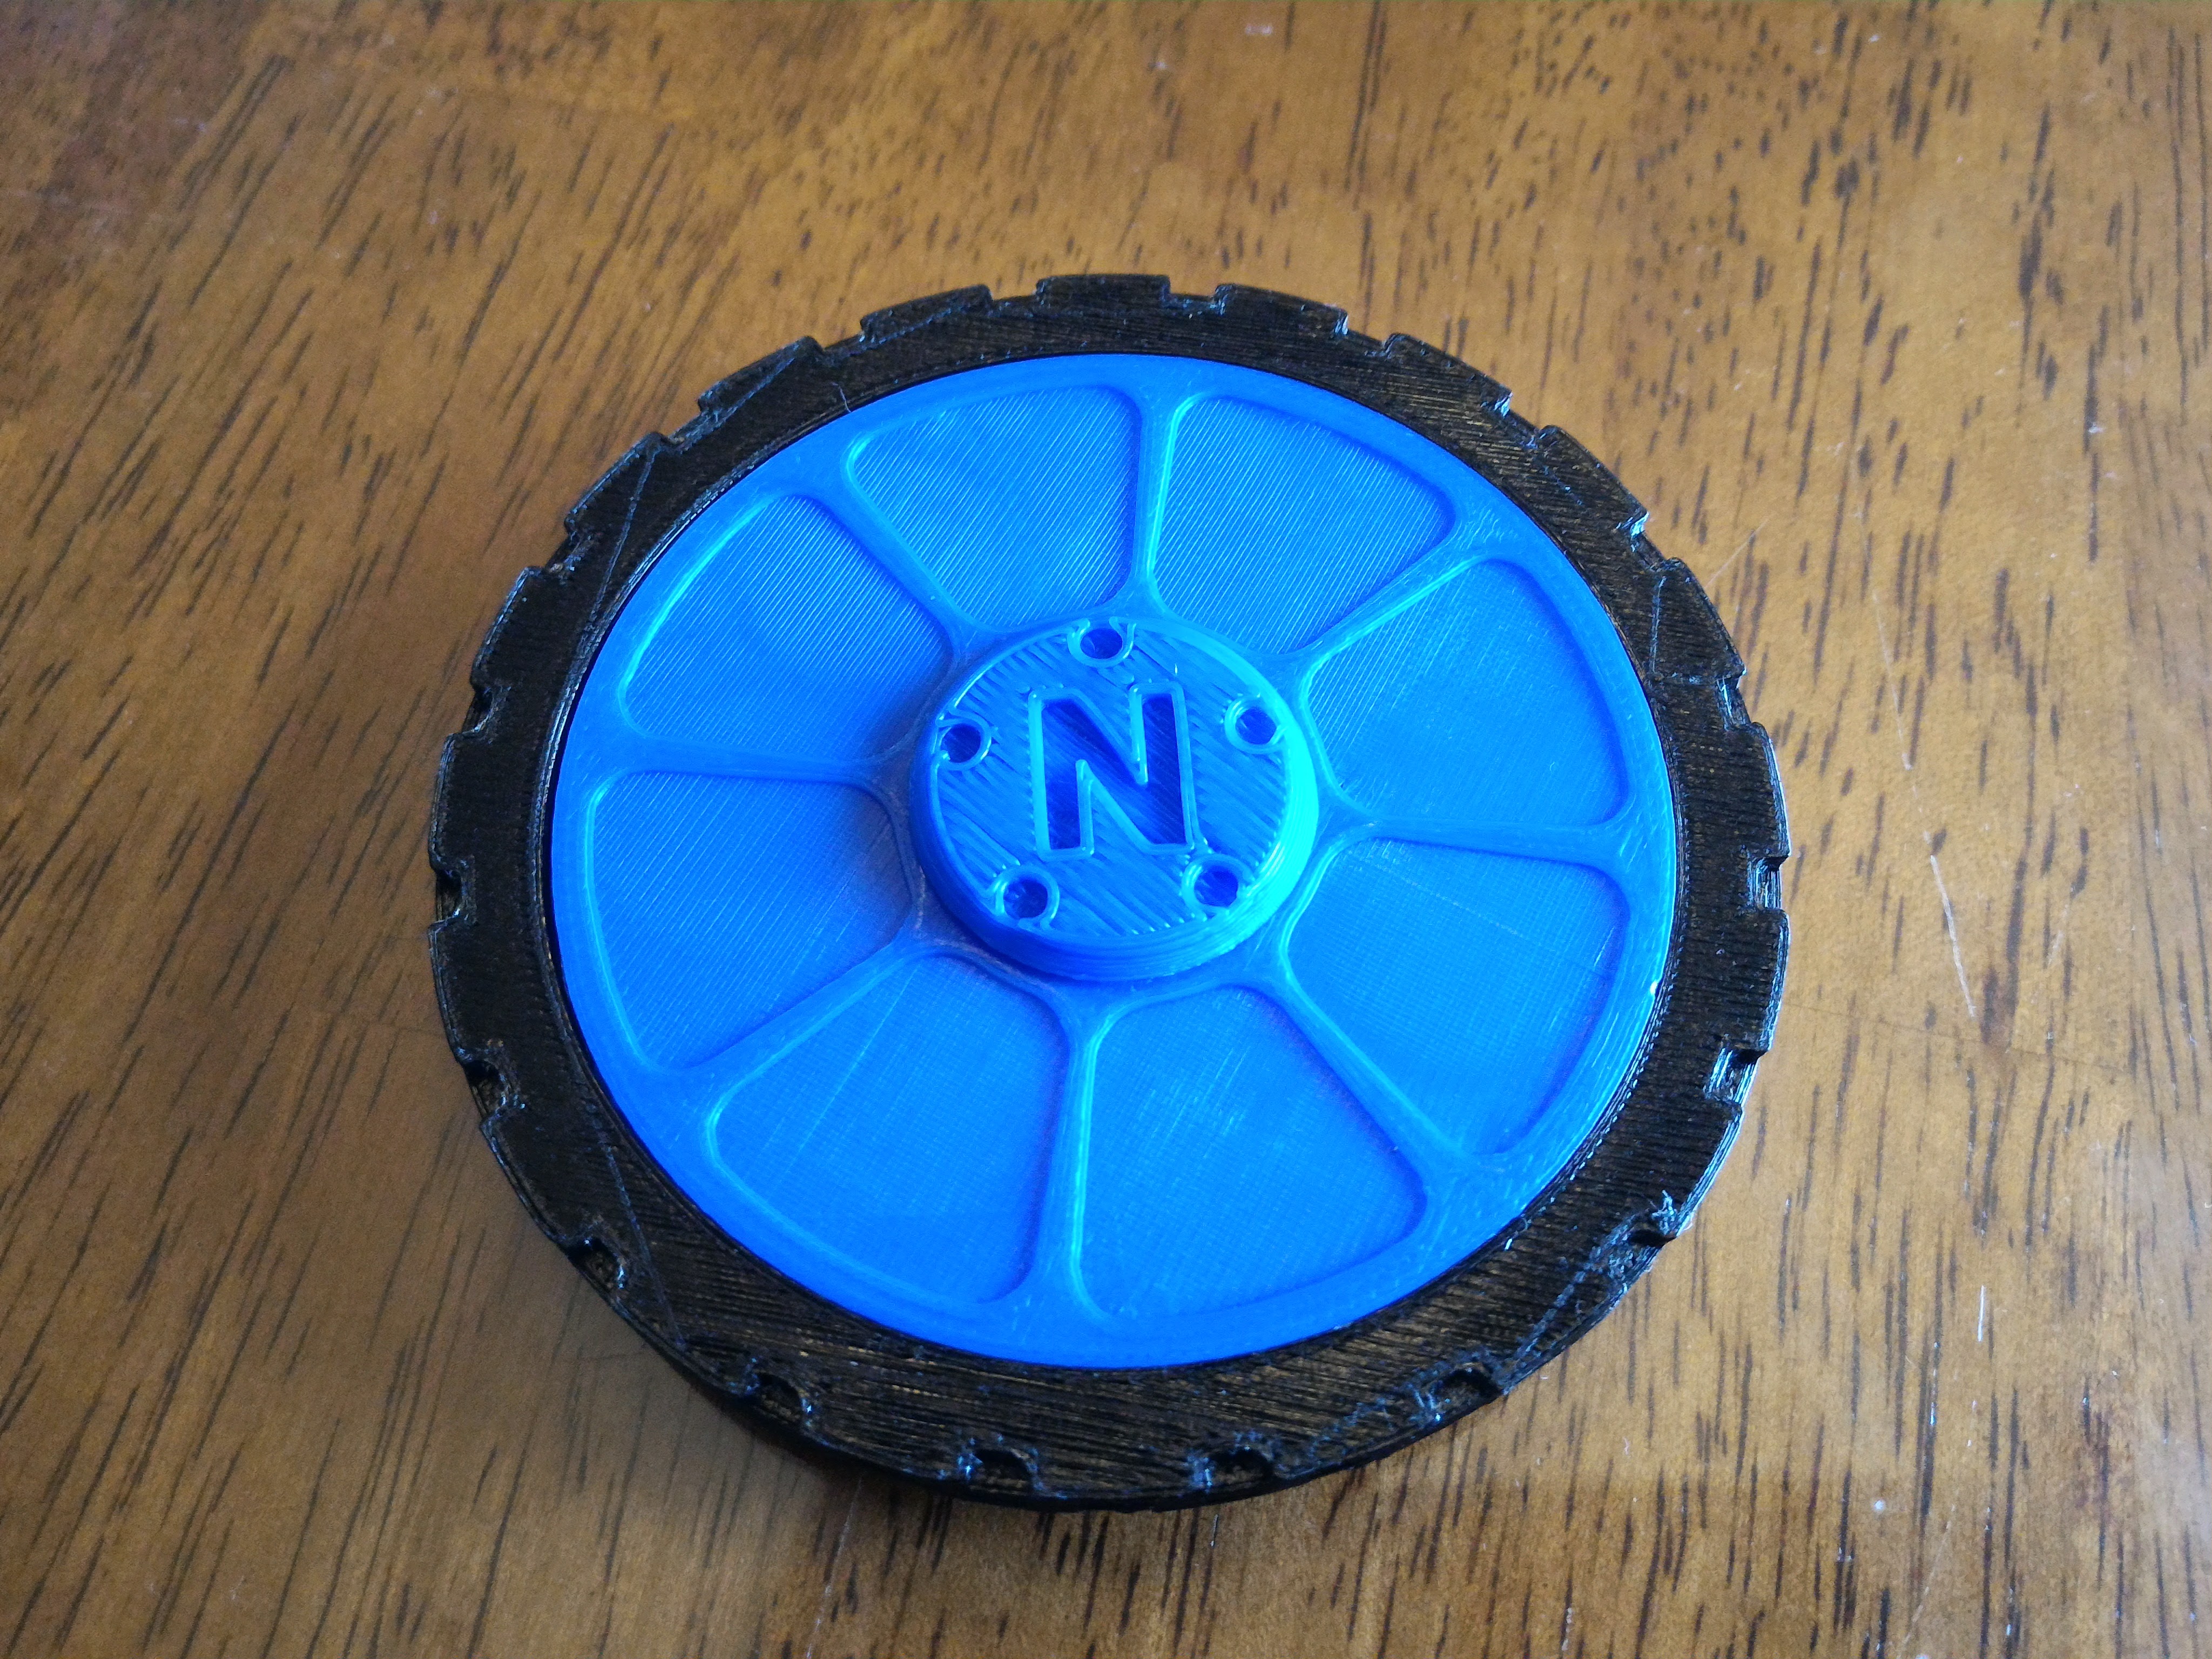 Wheel fidget spinner - complete with tire